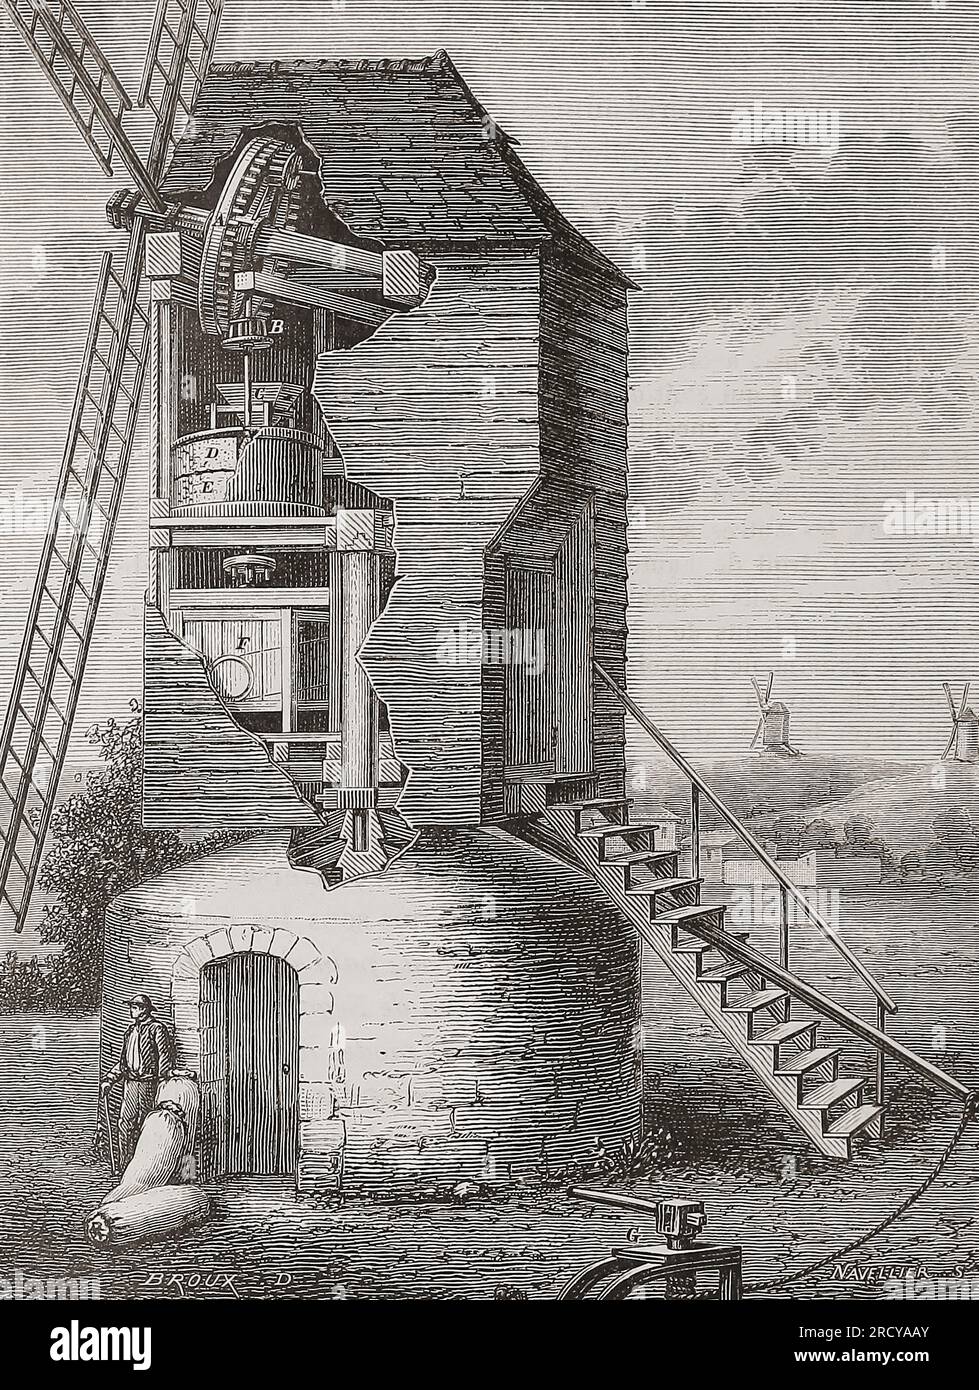 19th century cutaway view of a windmill showing the machinery used to grind grain.  After an illustration in Les merveilles de l'industrie, by Louis Figuier, published 1877. Stock Photo